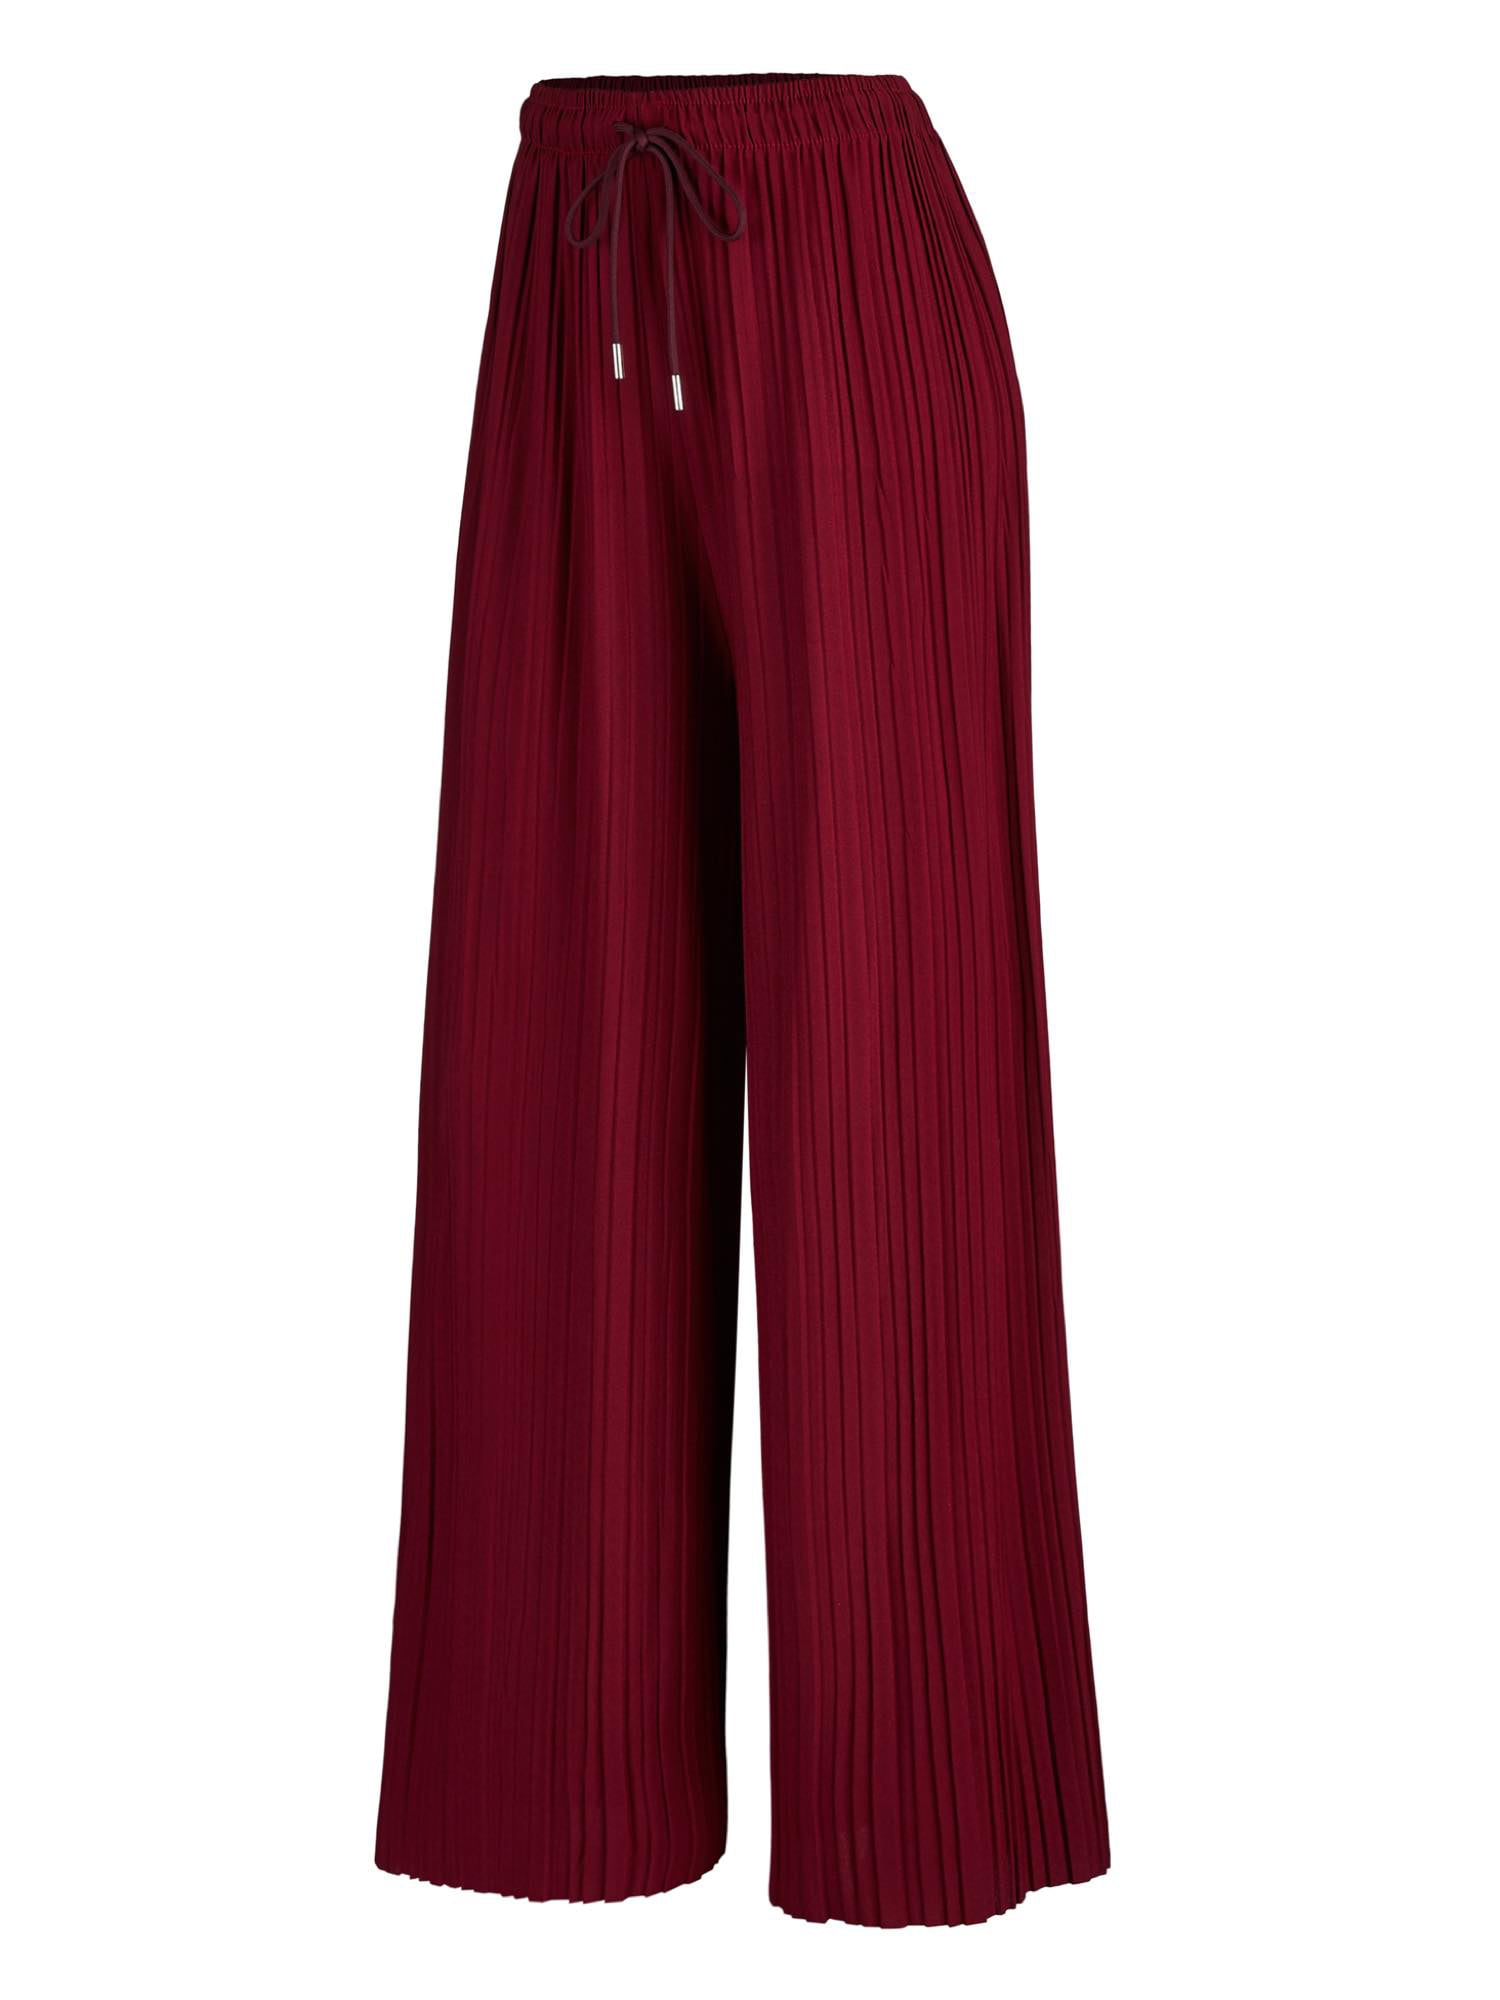 MBJ WB1484 Womens Pleated Wide Leg Palazzo Pants with Drawstring ...